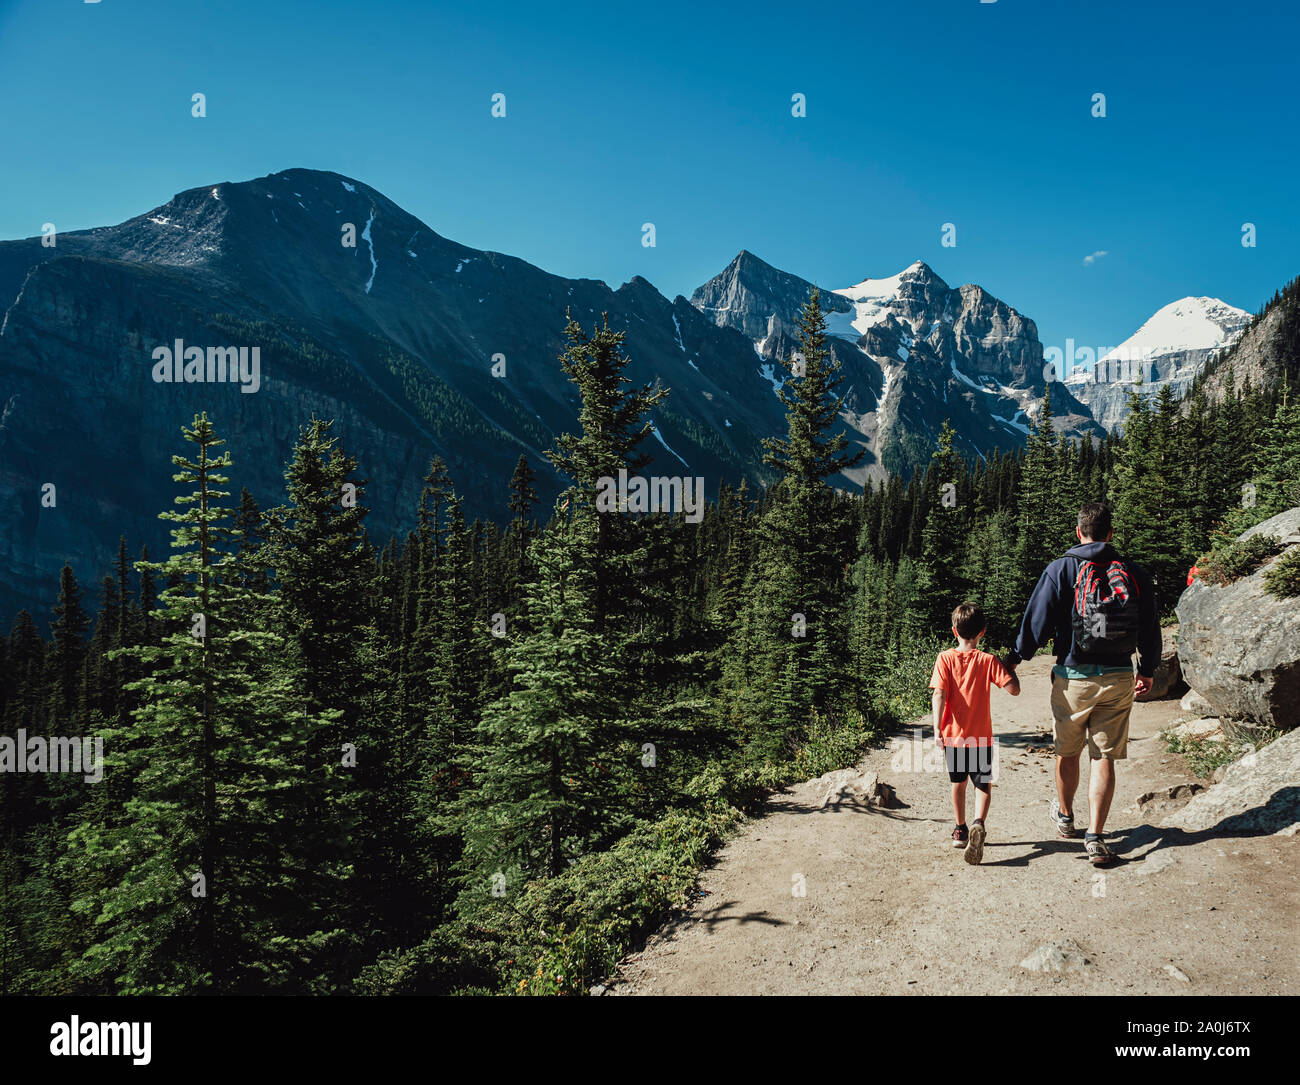 Father and son holding hands hiking on a path in the mountains. Stock Photo